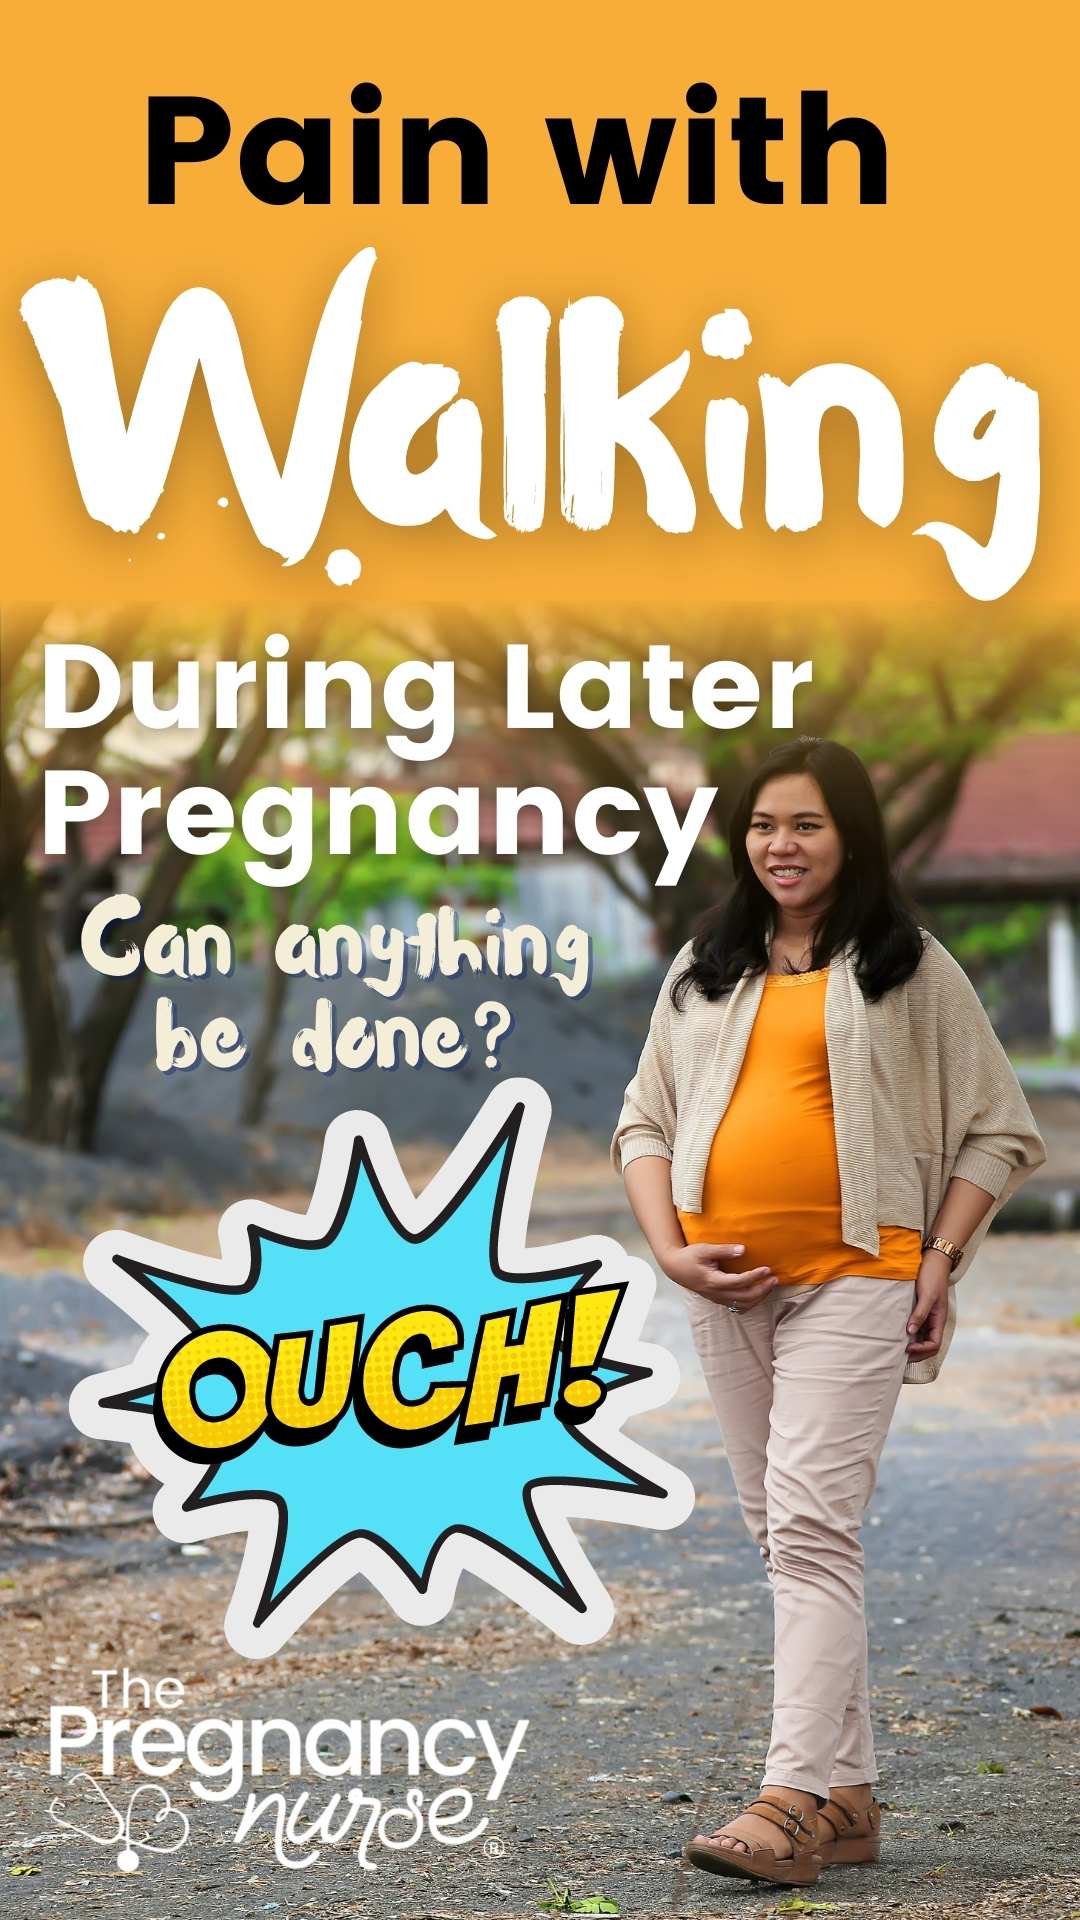 At 38 weeks pregnant, many women are finding that walking is becoming increasingly difficult. This is due to the fact that their pelvis is starting to open up in preparation for labor. Learn more about why walking can be so difficult and what you can do to make it a little easier.